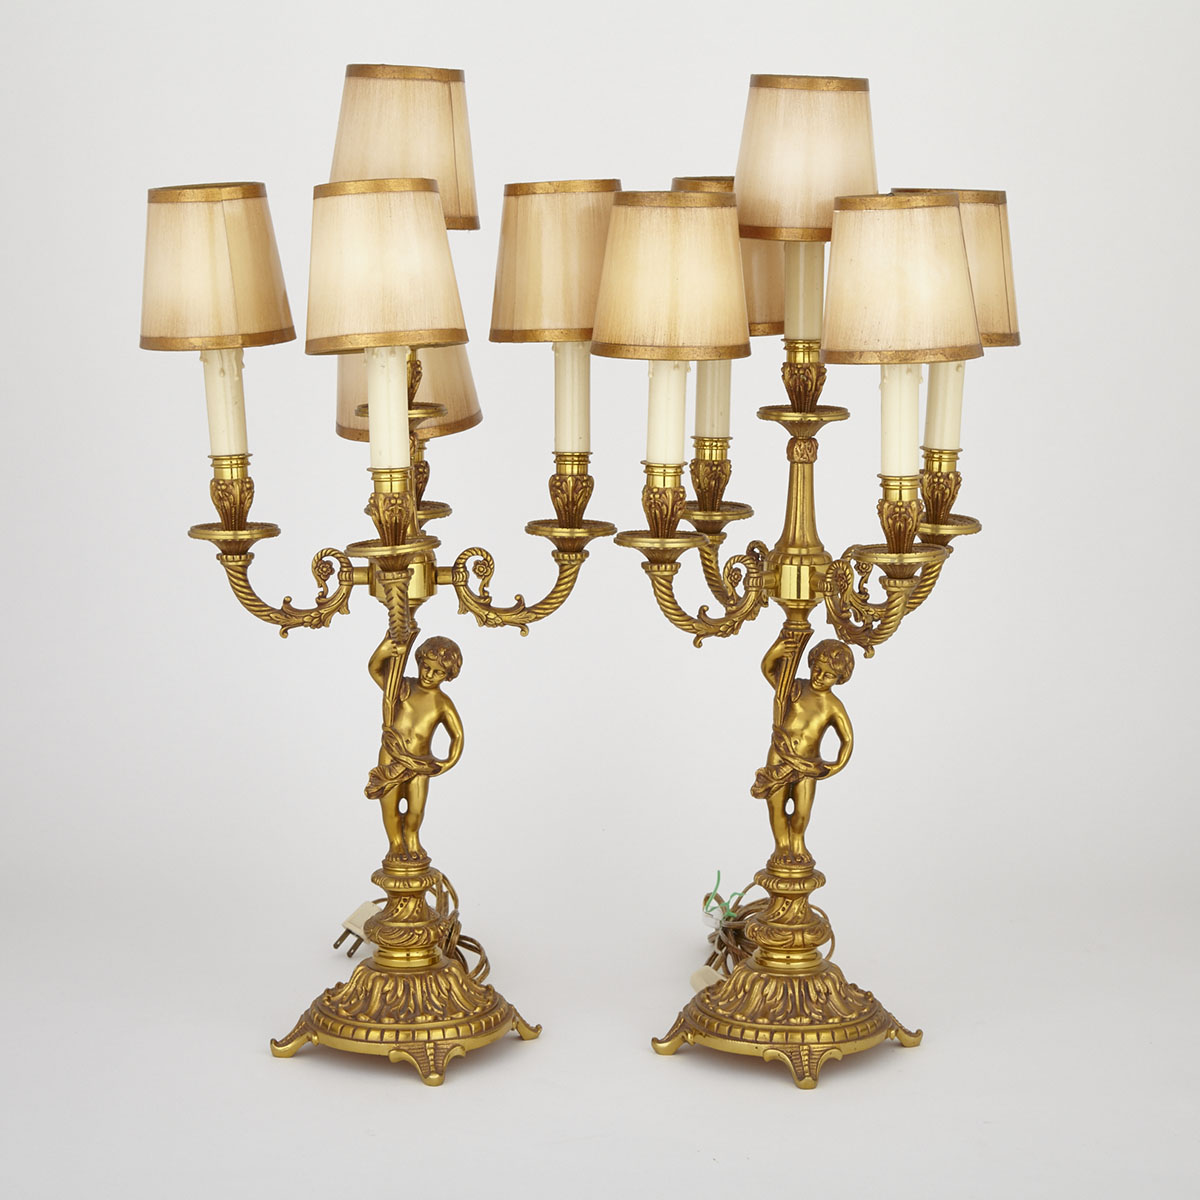 Pair of Continental Gilt Bronze Figural Candelabra Table Lamps, mid 20th century